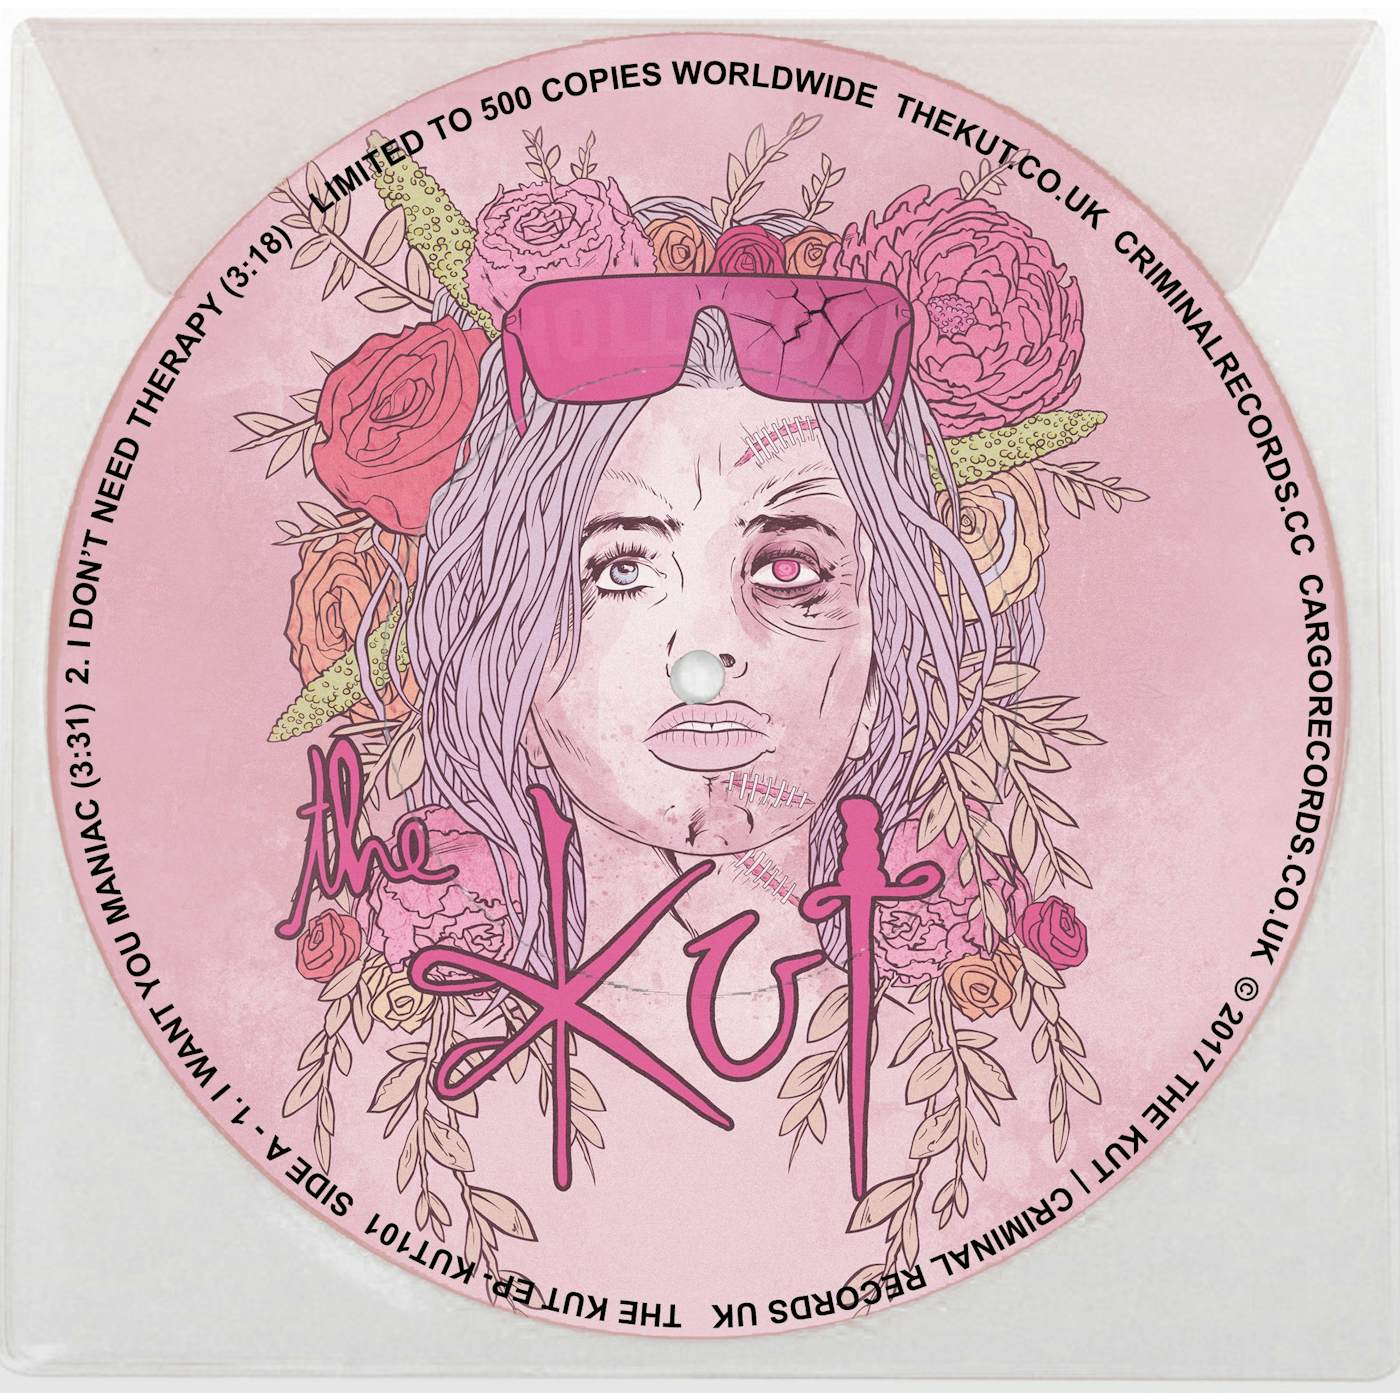 The Kut - Limited Edition 7" Vinyl Self Titled EP